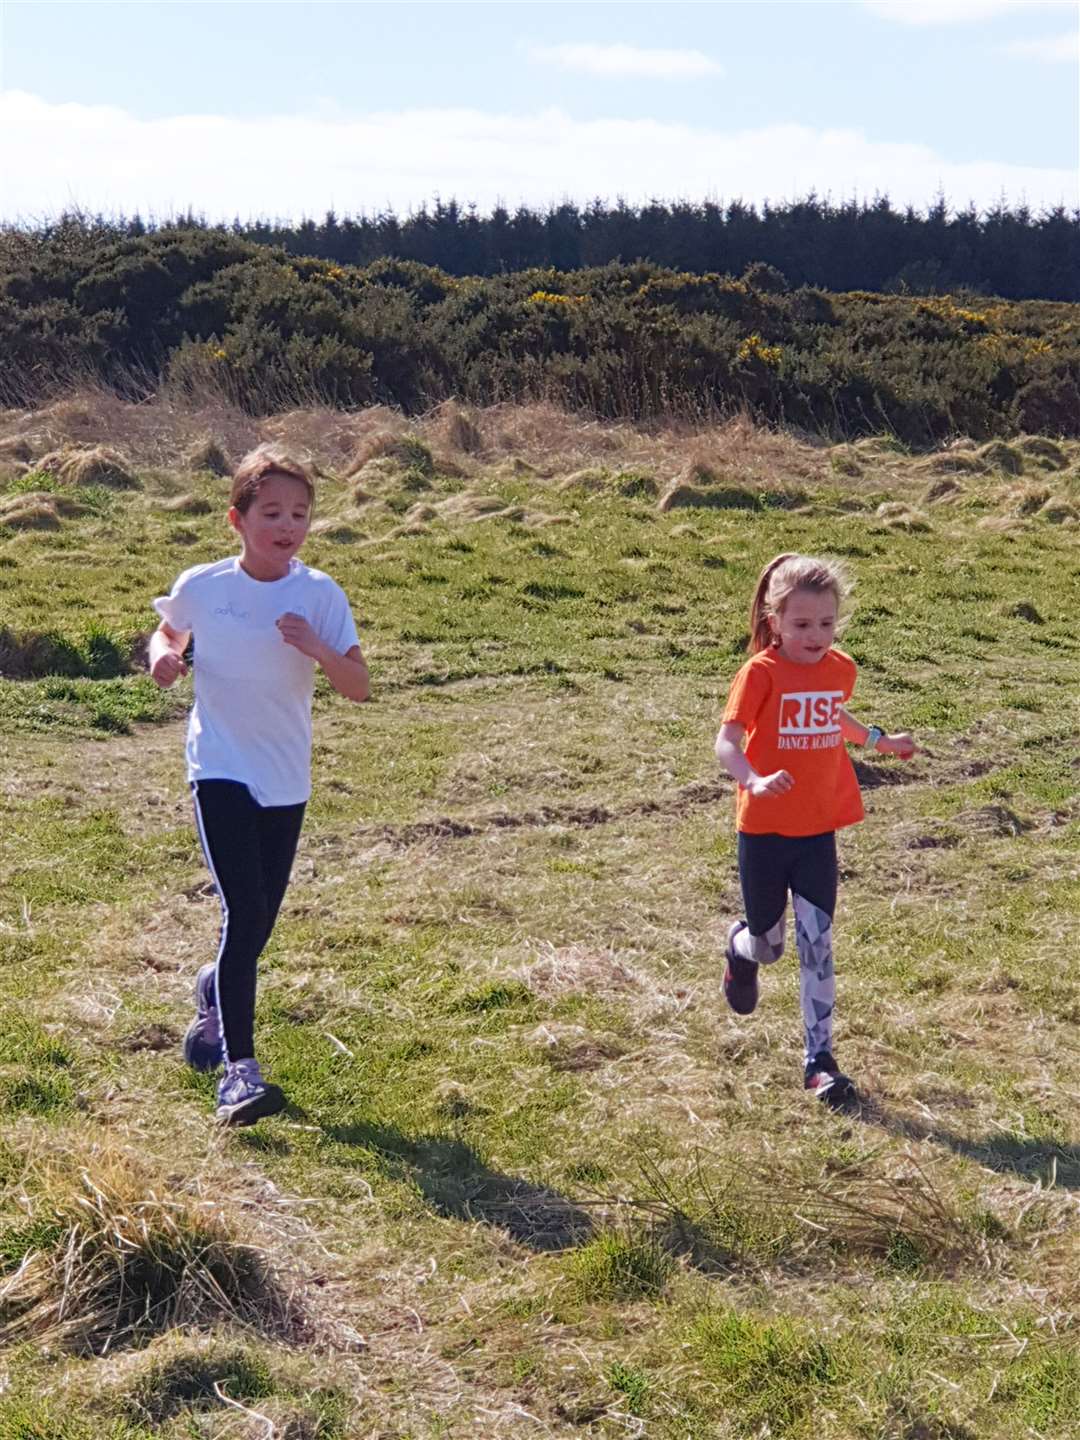 Beth (in white) and Elsa Stockan on their 3k run as part of the North Highland Harriers' virtual challenge.